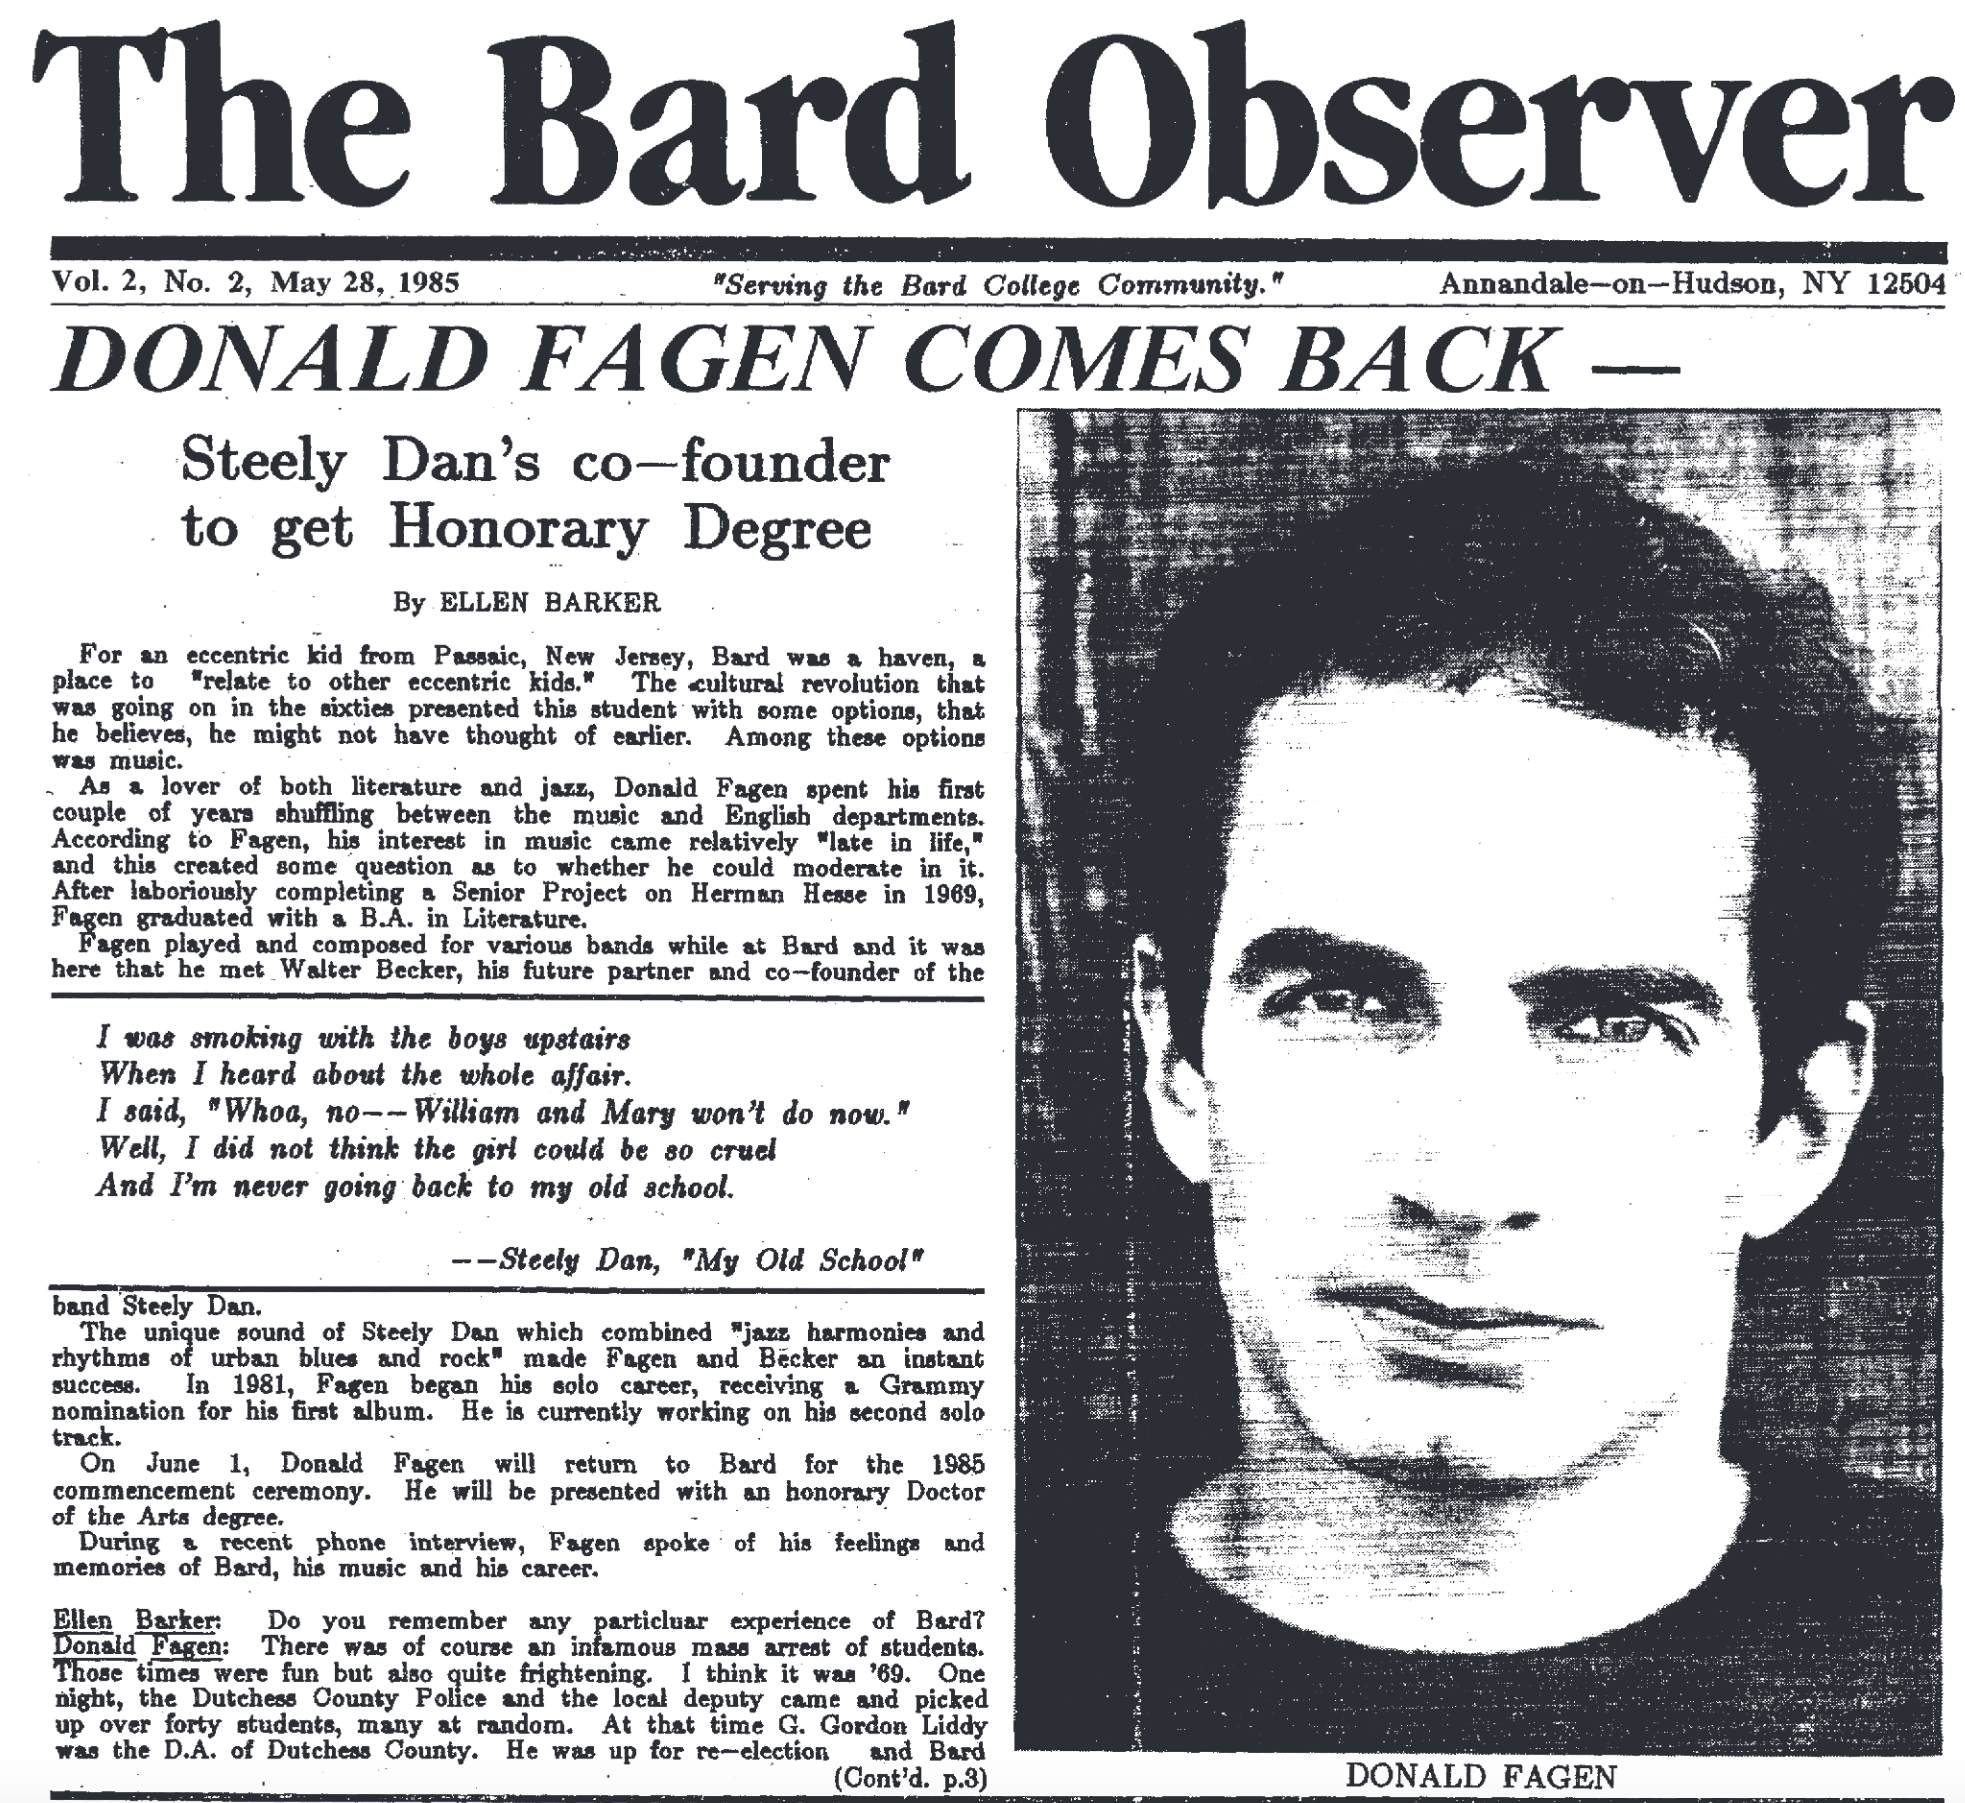 Donald Fagen article in the Bard Observer, May 28, 1985